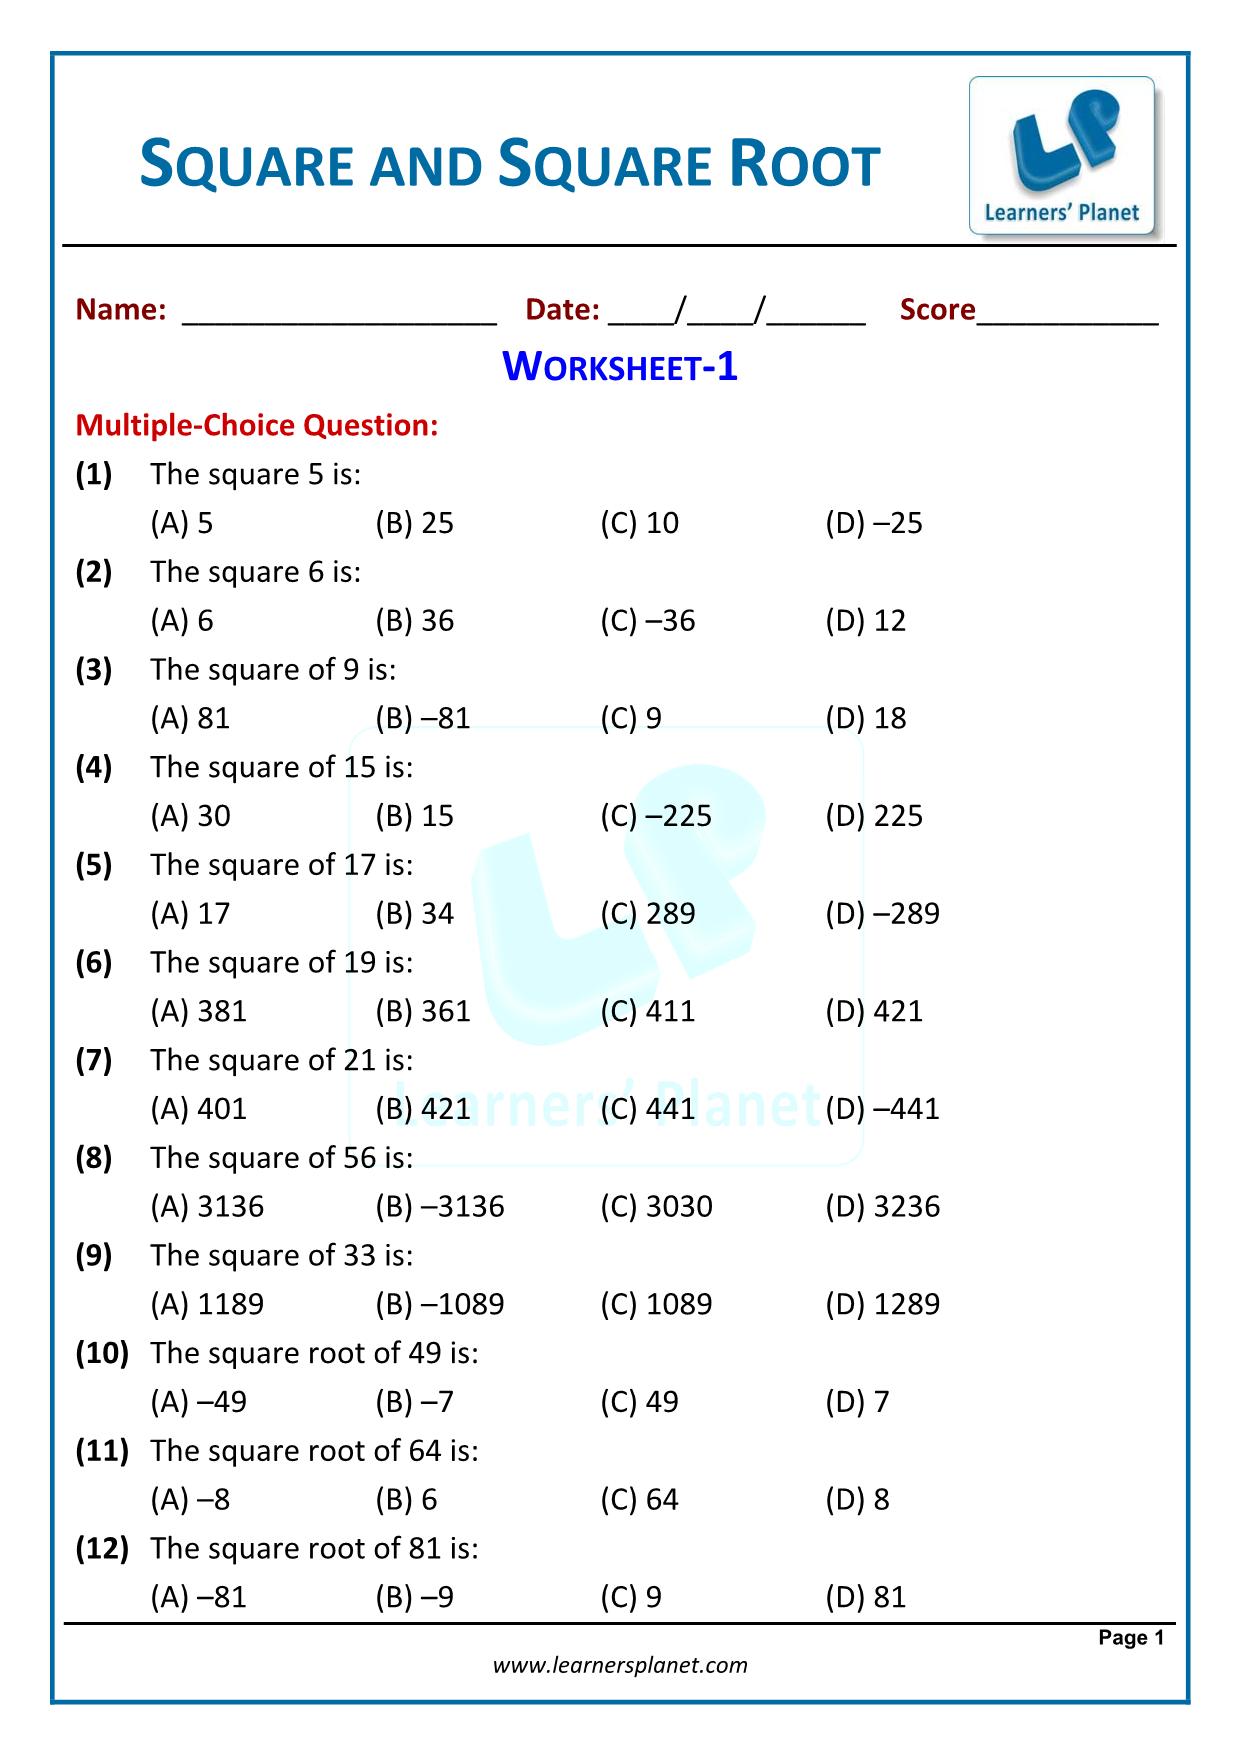 NCERT grade viii math squares and square roots videos, quiz In Squares And Square Roots Worksheet